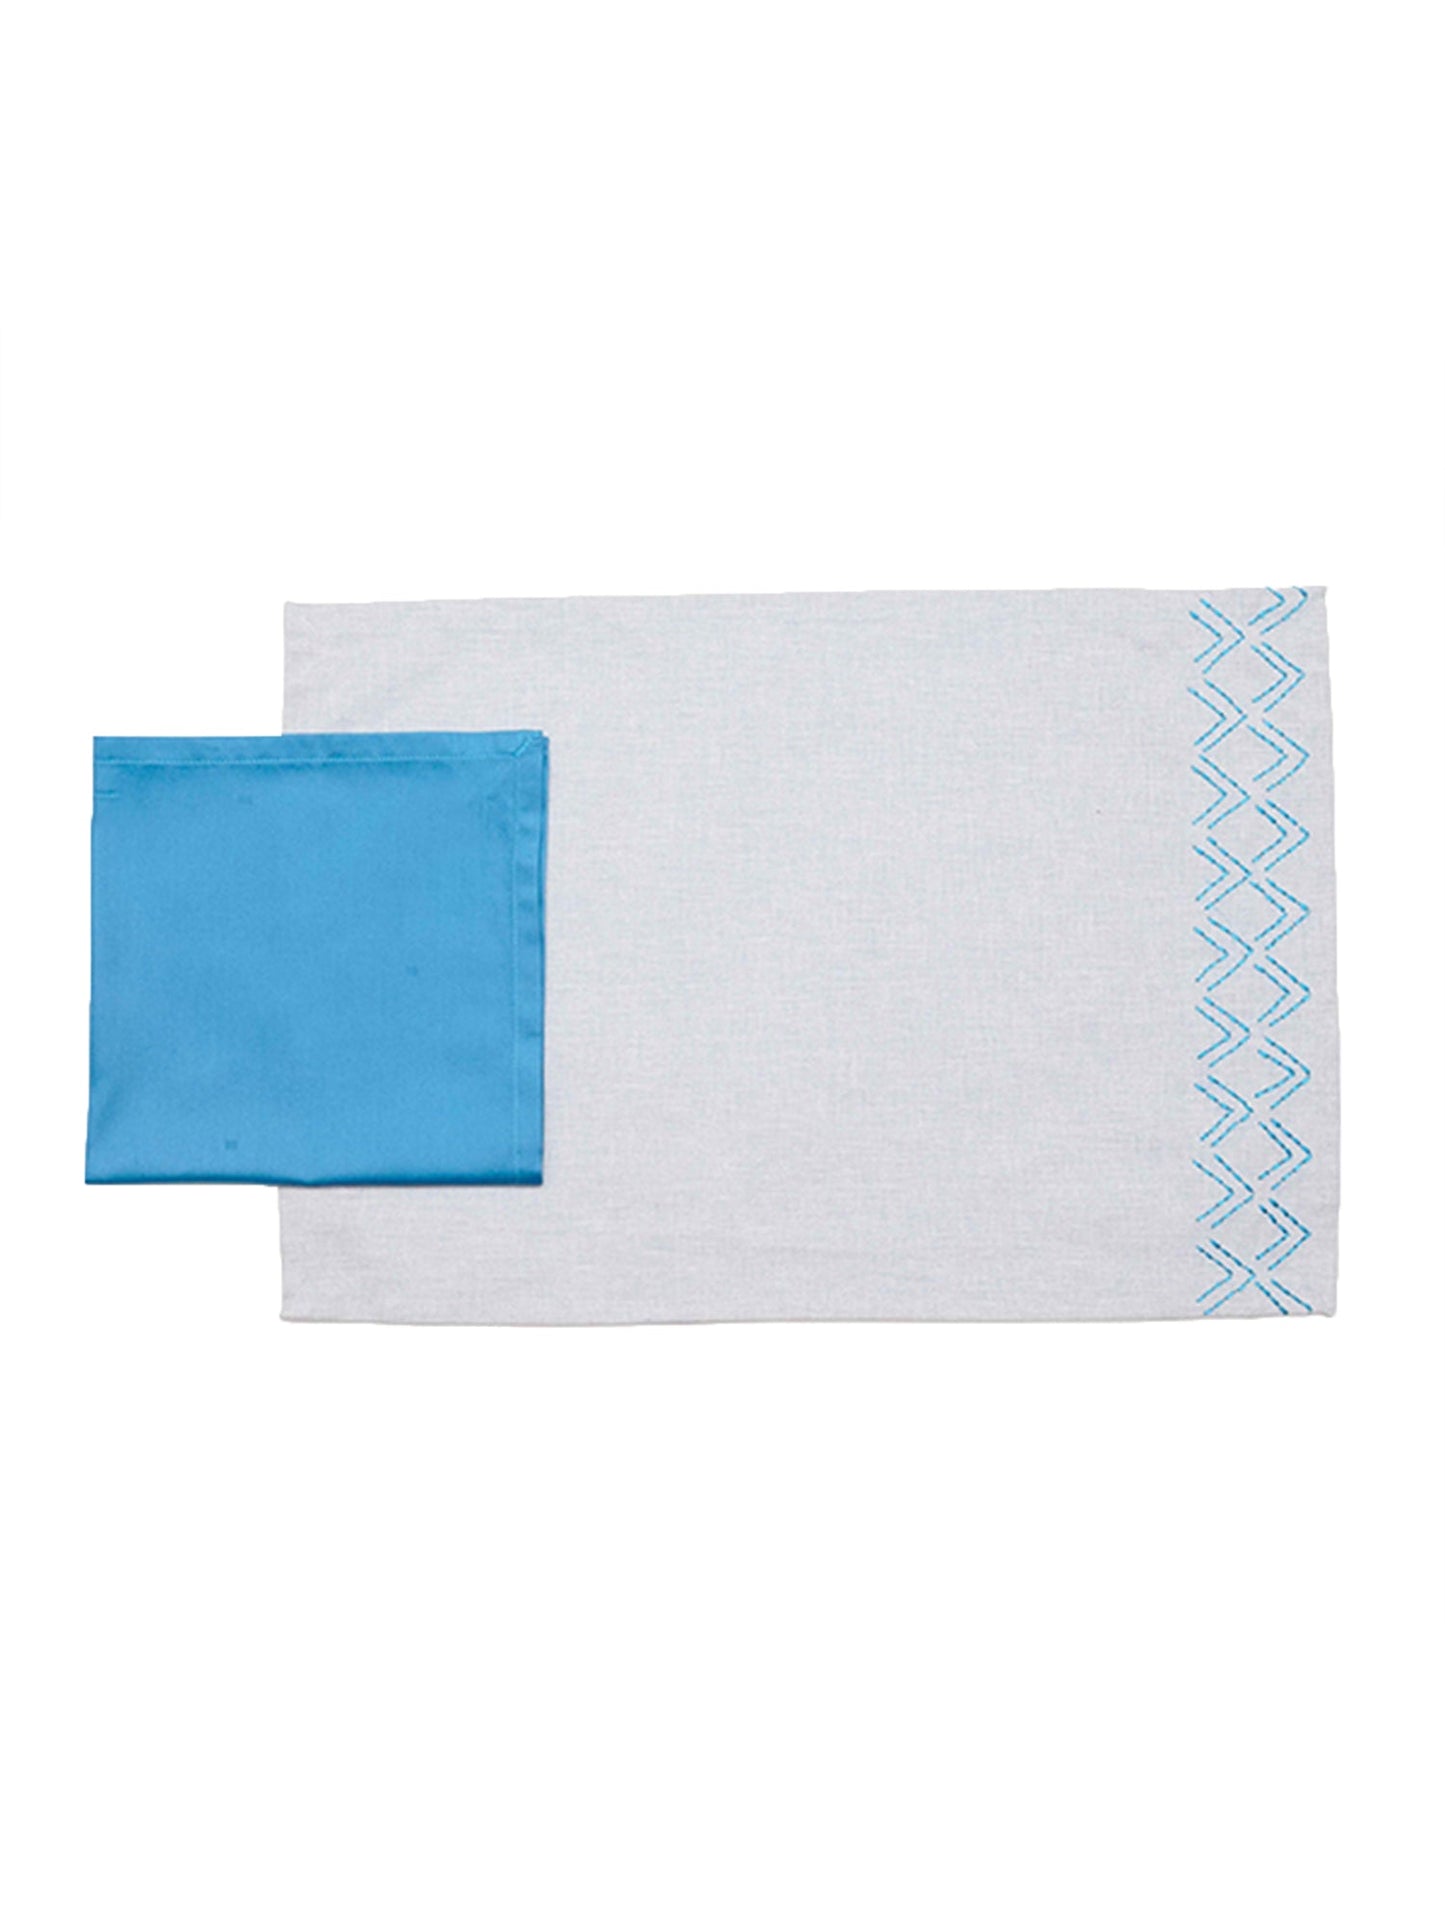 hand embroidered dinner table placemats and napkins in blue shades - 13x19 inch 